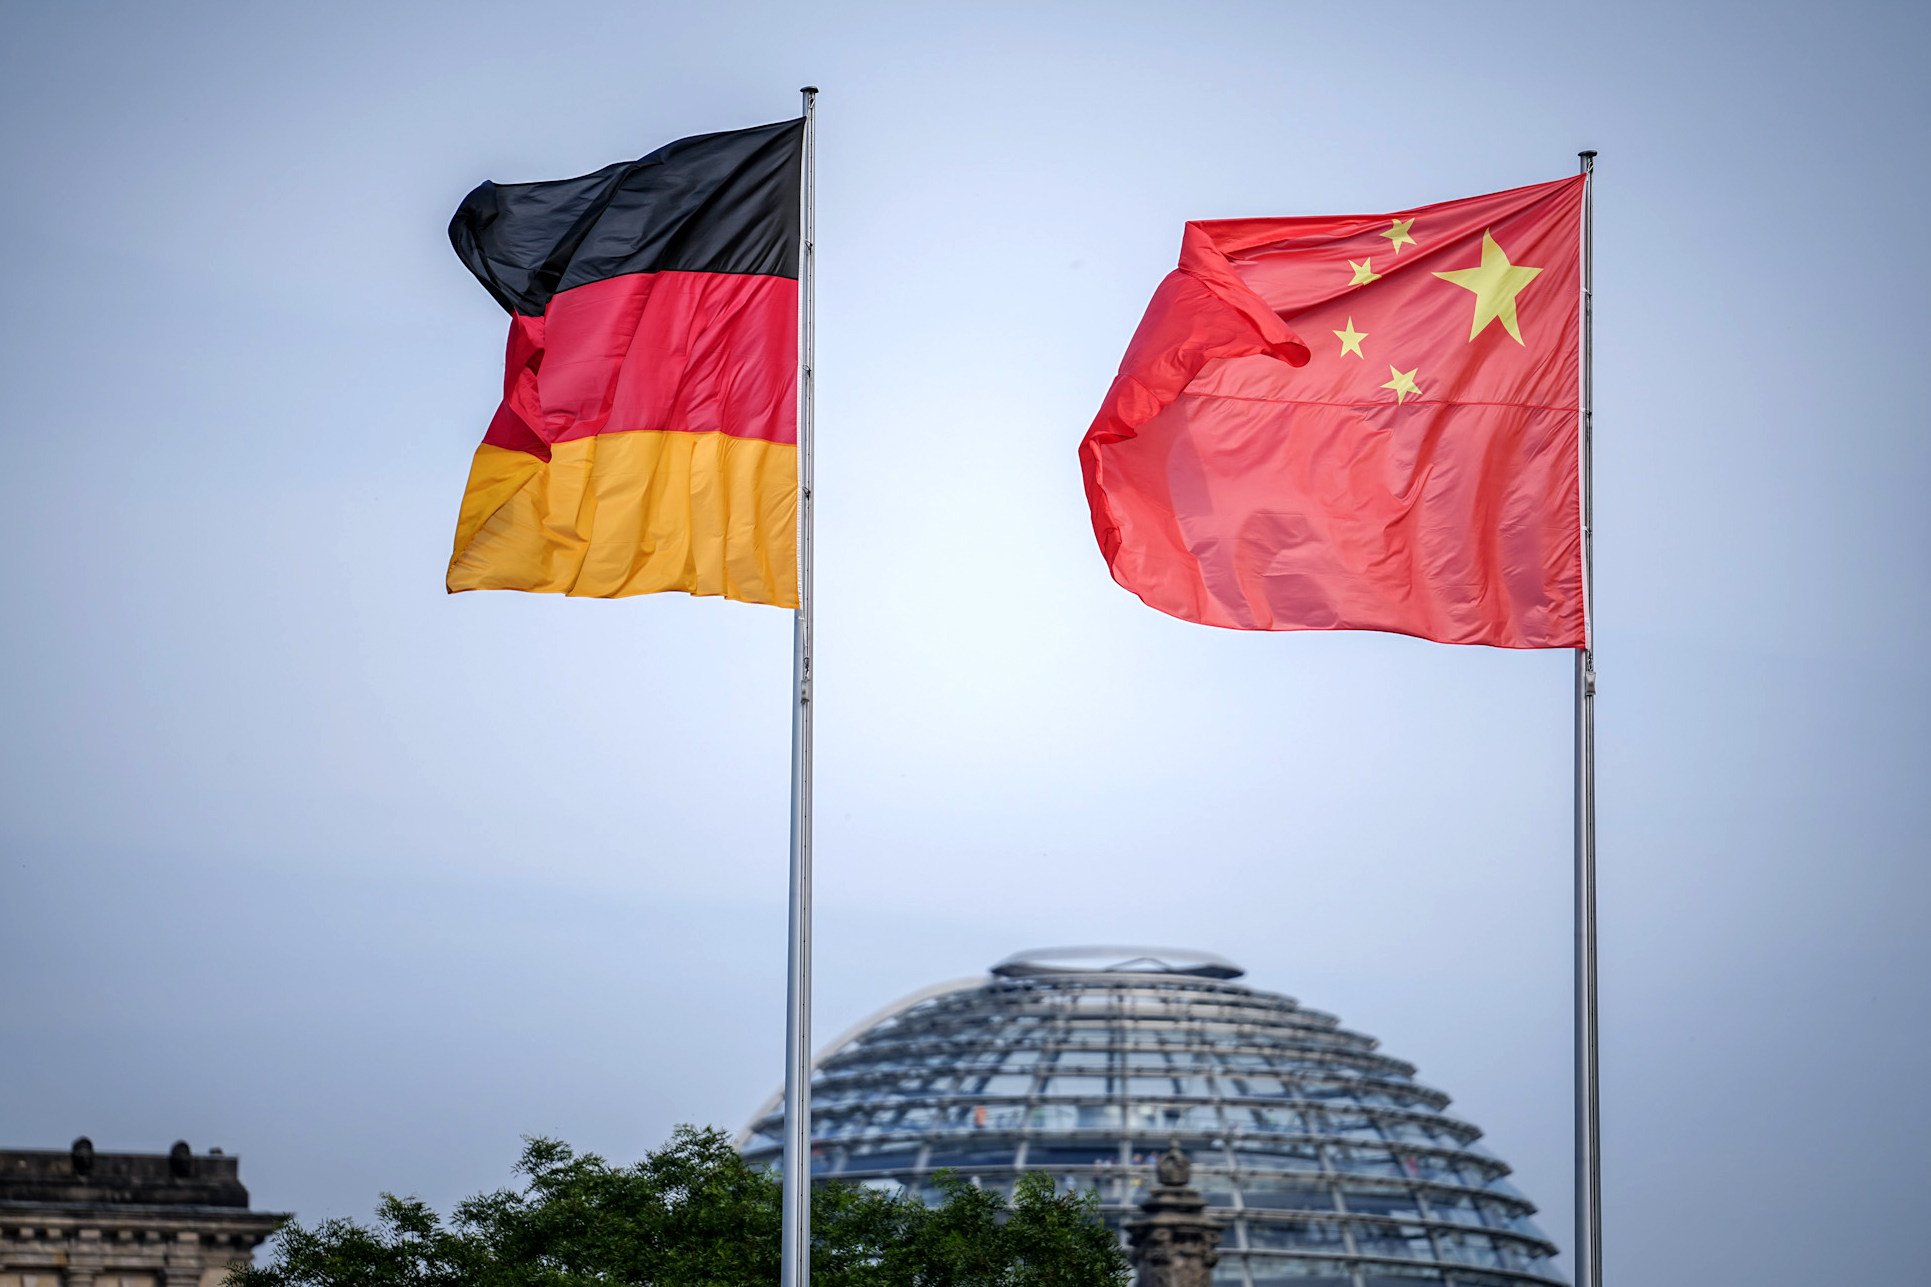 German prosecutors have said Thomas R stands accused of acting as an agent for an employee of China’s Ministry of State Security. Photo: dpa